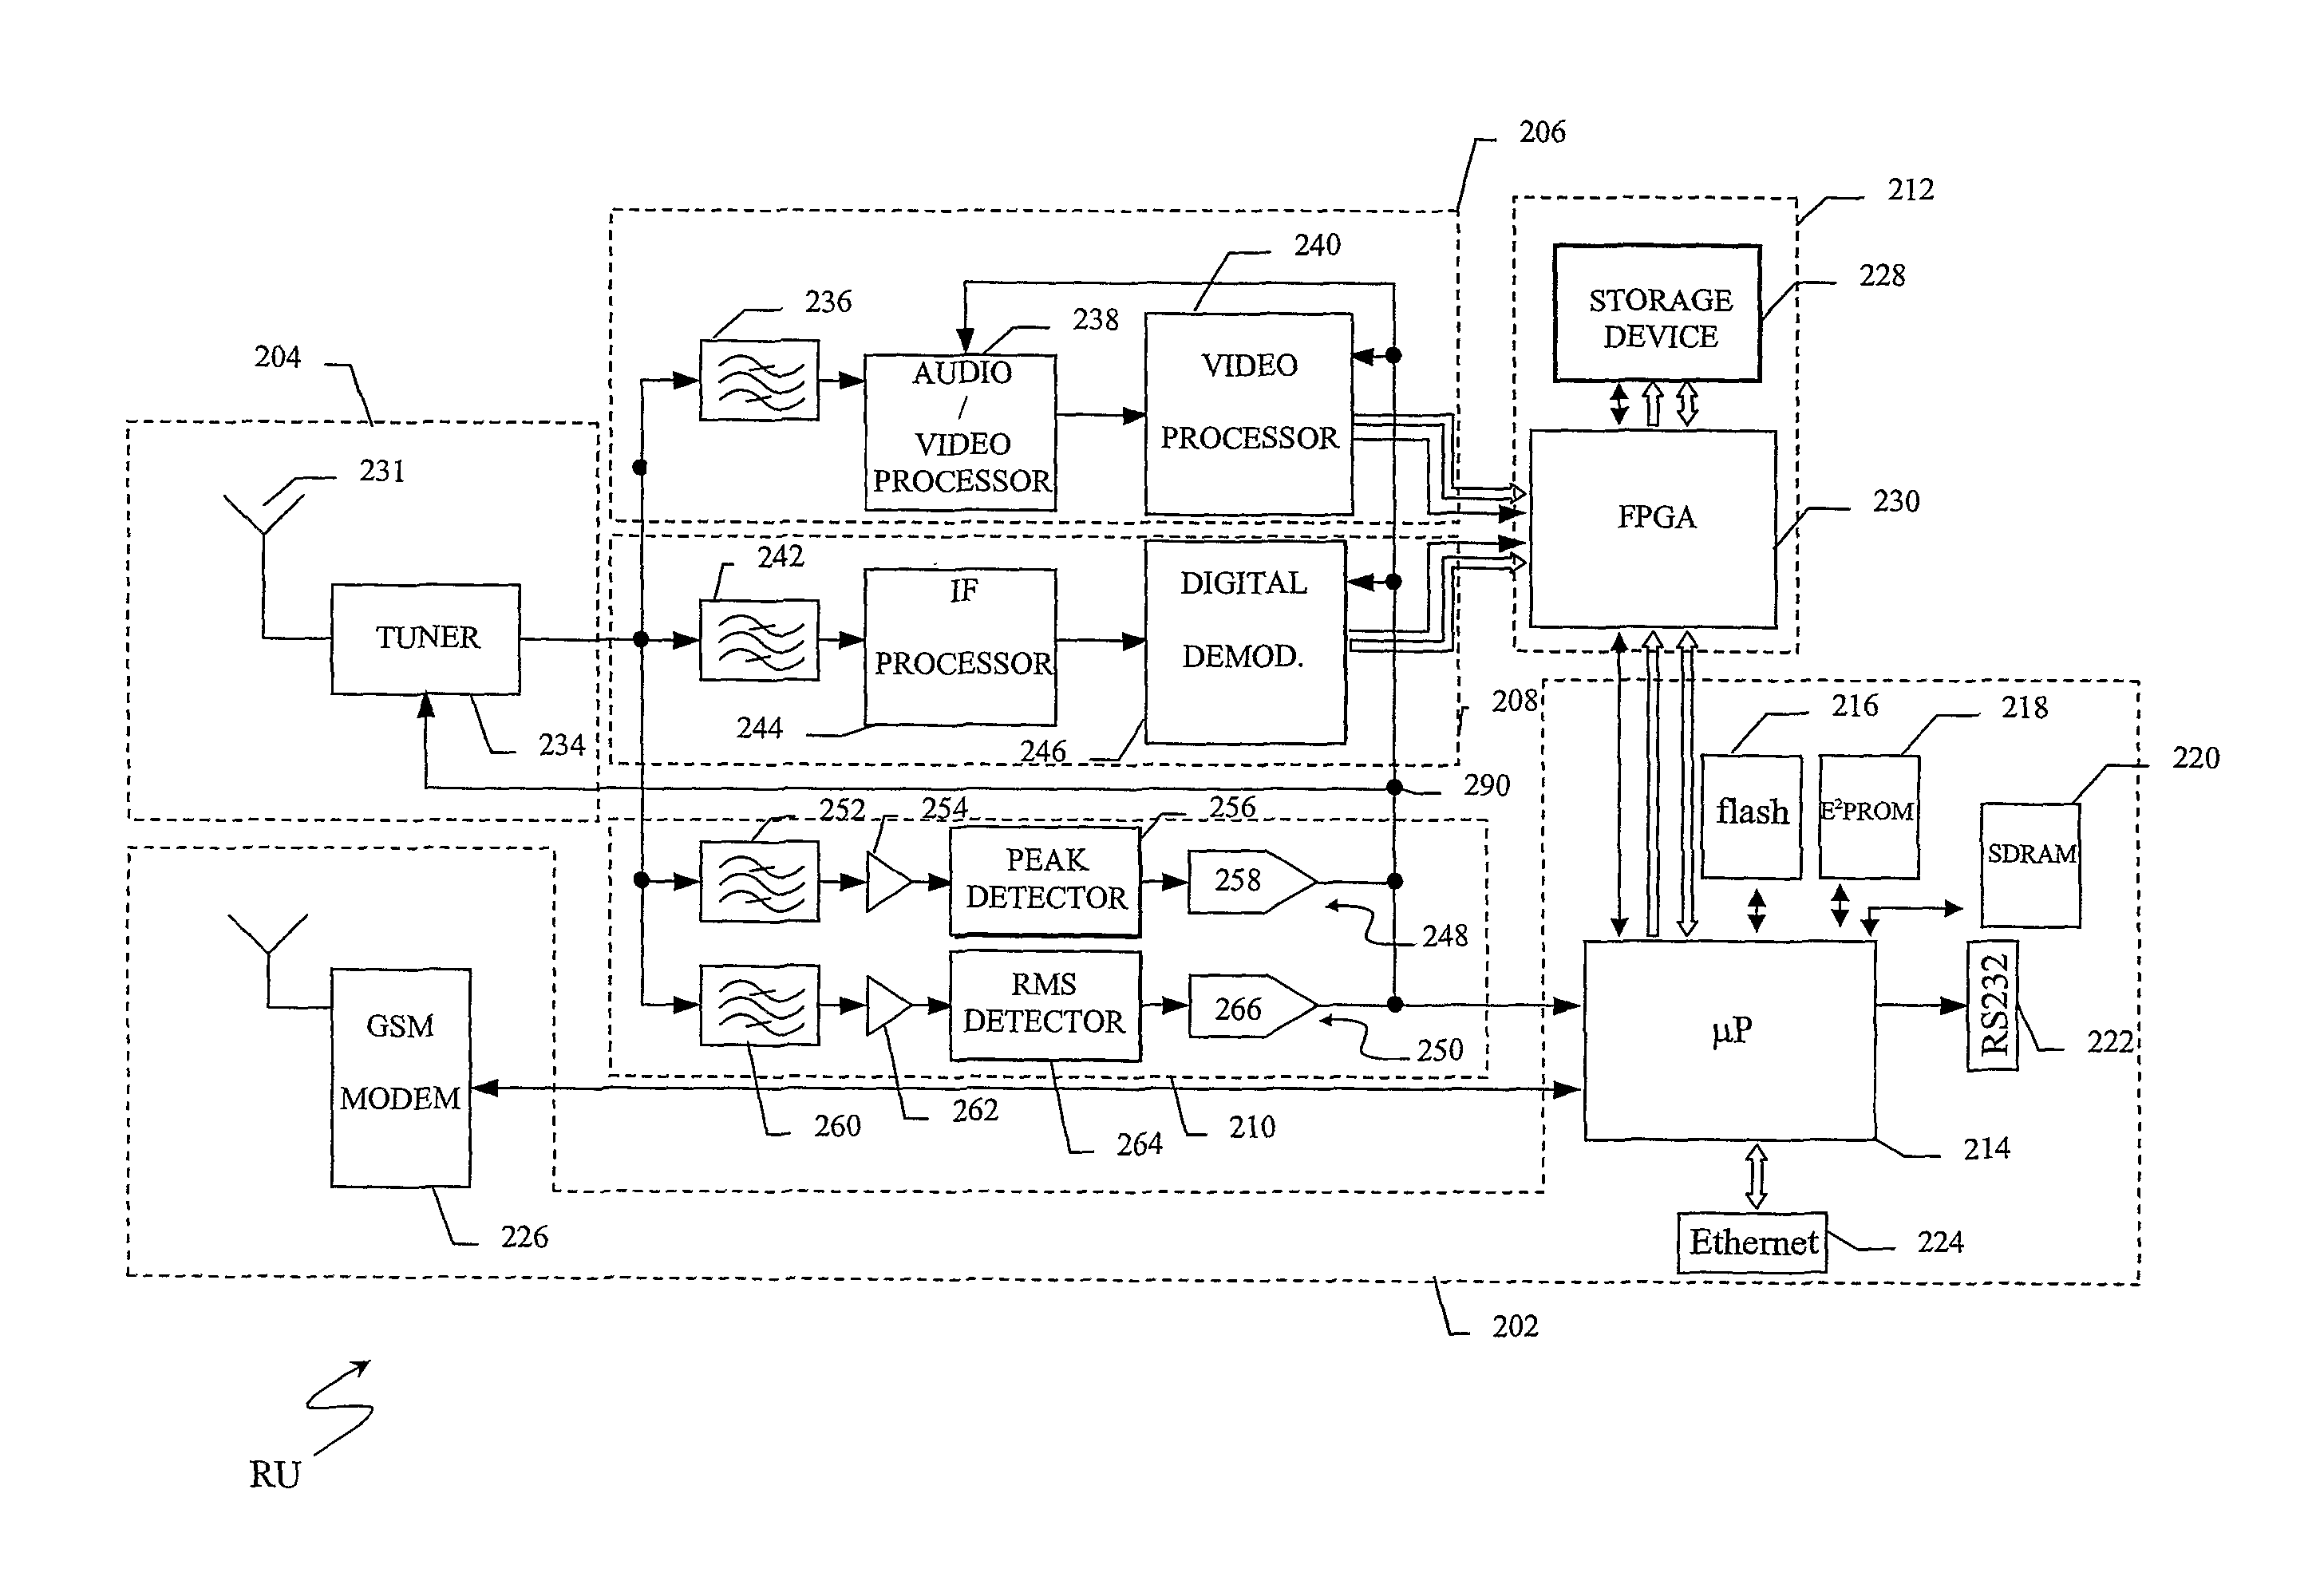 Monitoring system for monitoring coverage of broadcast transmissions